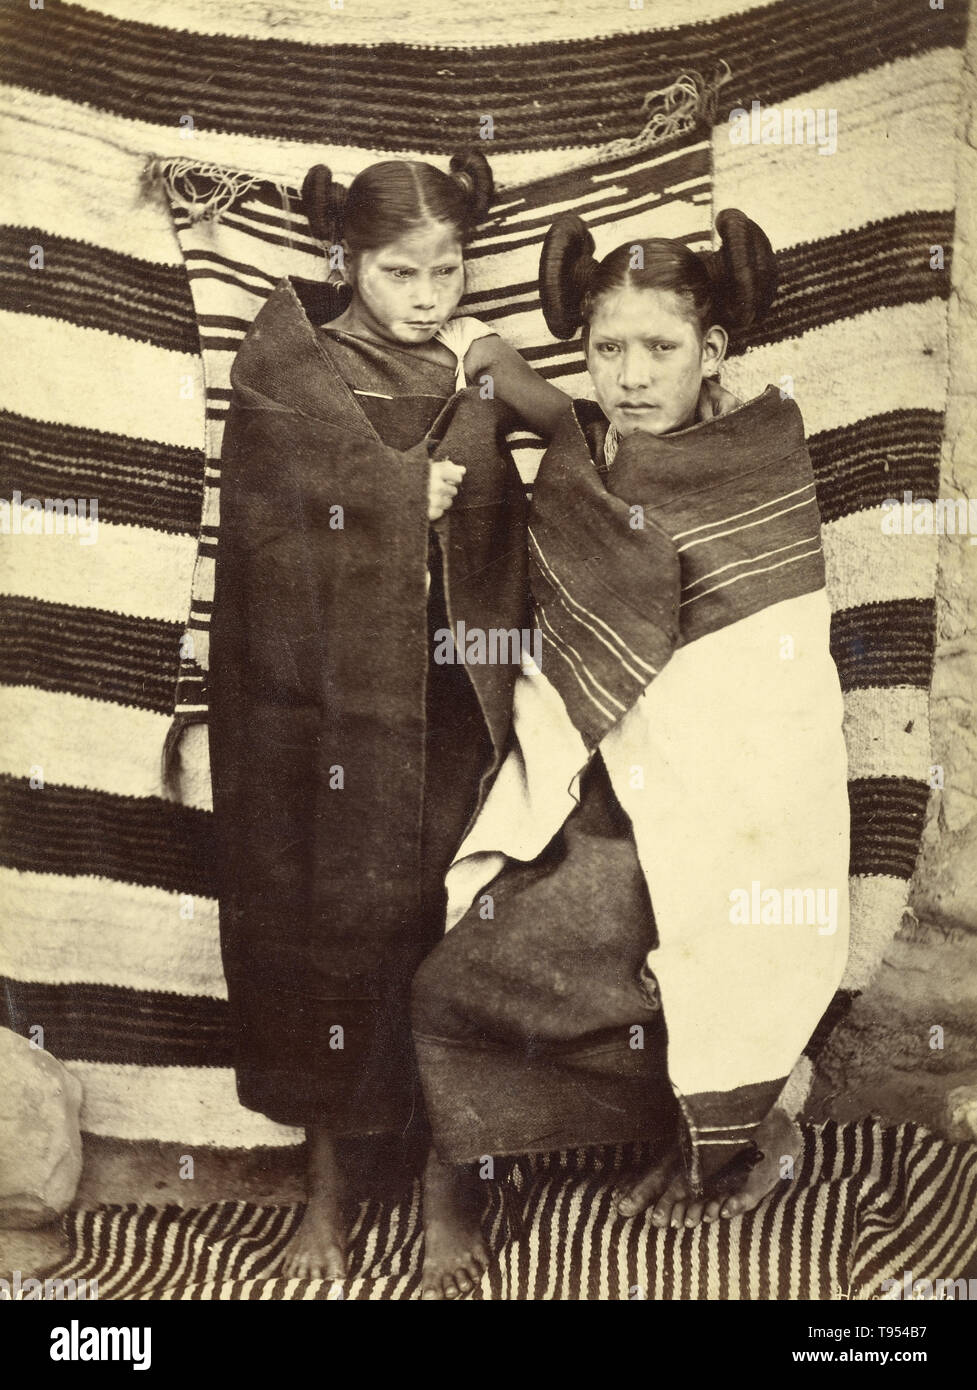 Hopi girls in traditional dress, taken by John K. Hillers (American, 1843 - 1925) in 1879. Albumen silver print. The Hopi are a Native American tribe, who primarily live on the Hopi Reservation in northeastern Arizona. According to the 2010 census, there were 19,327 Hopi in the United States. Stock Photo